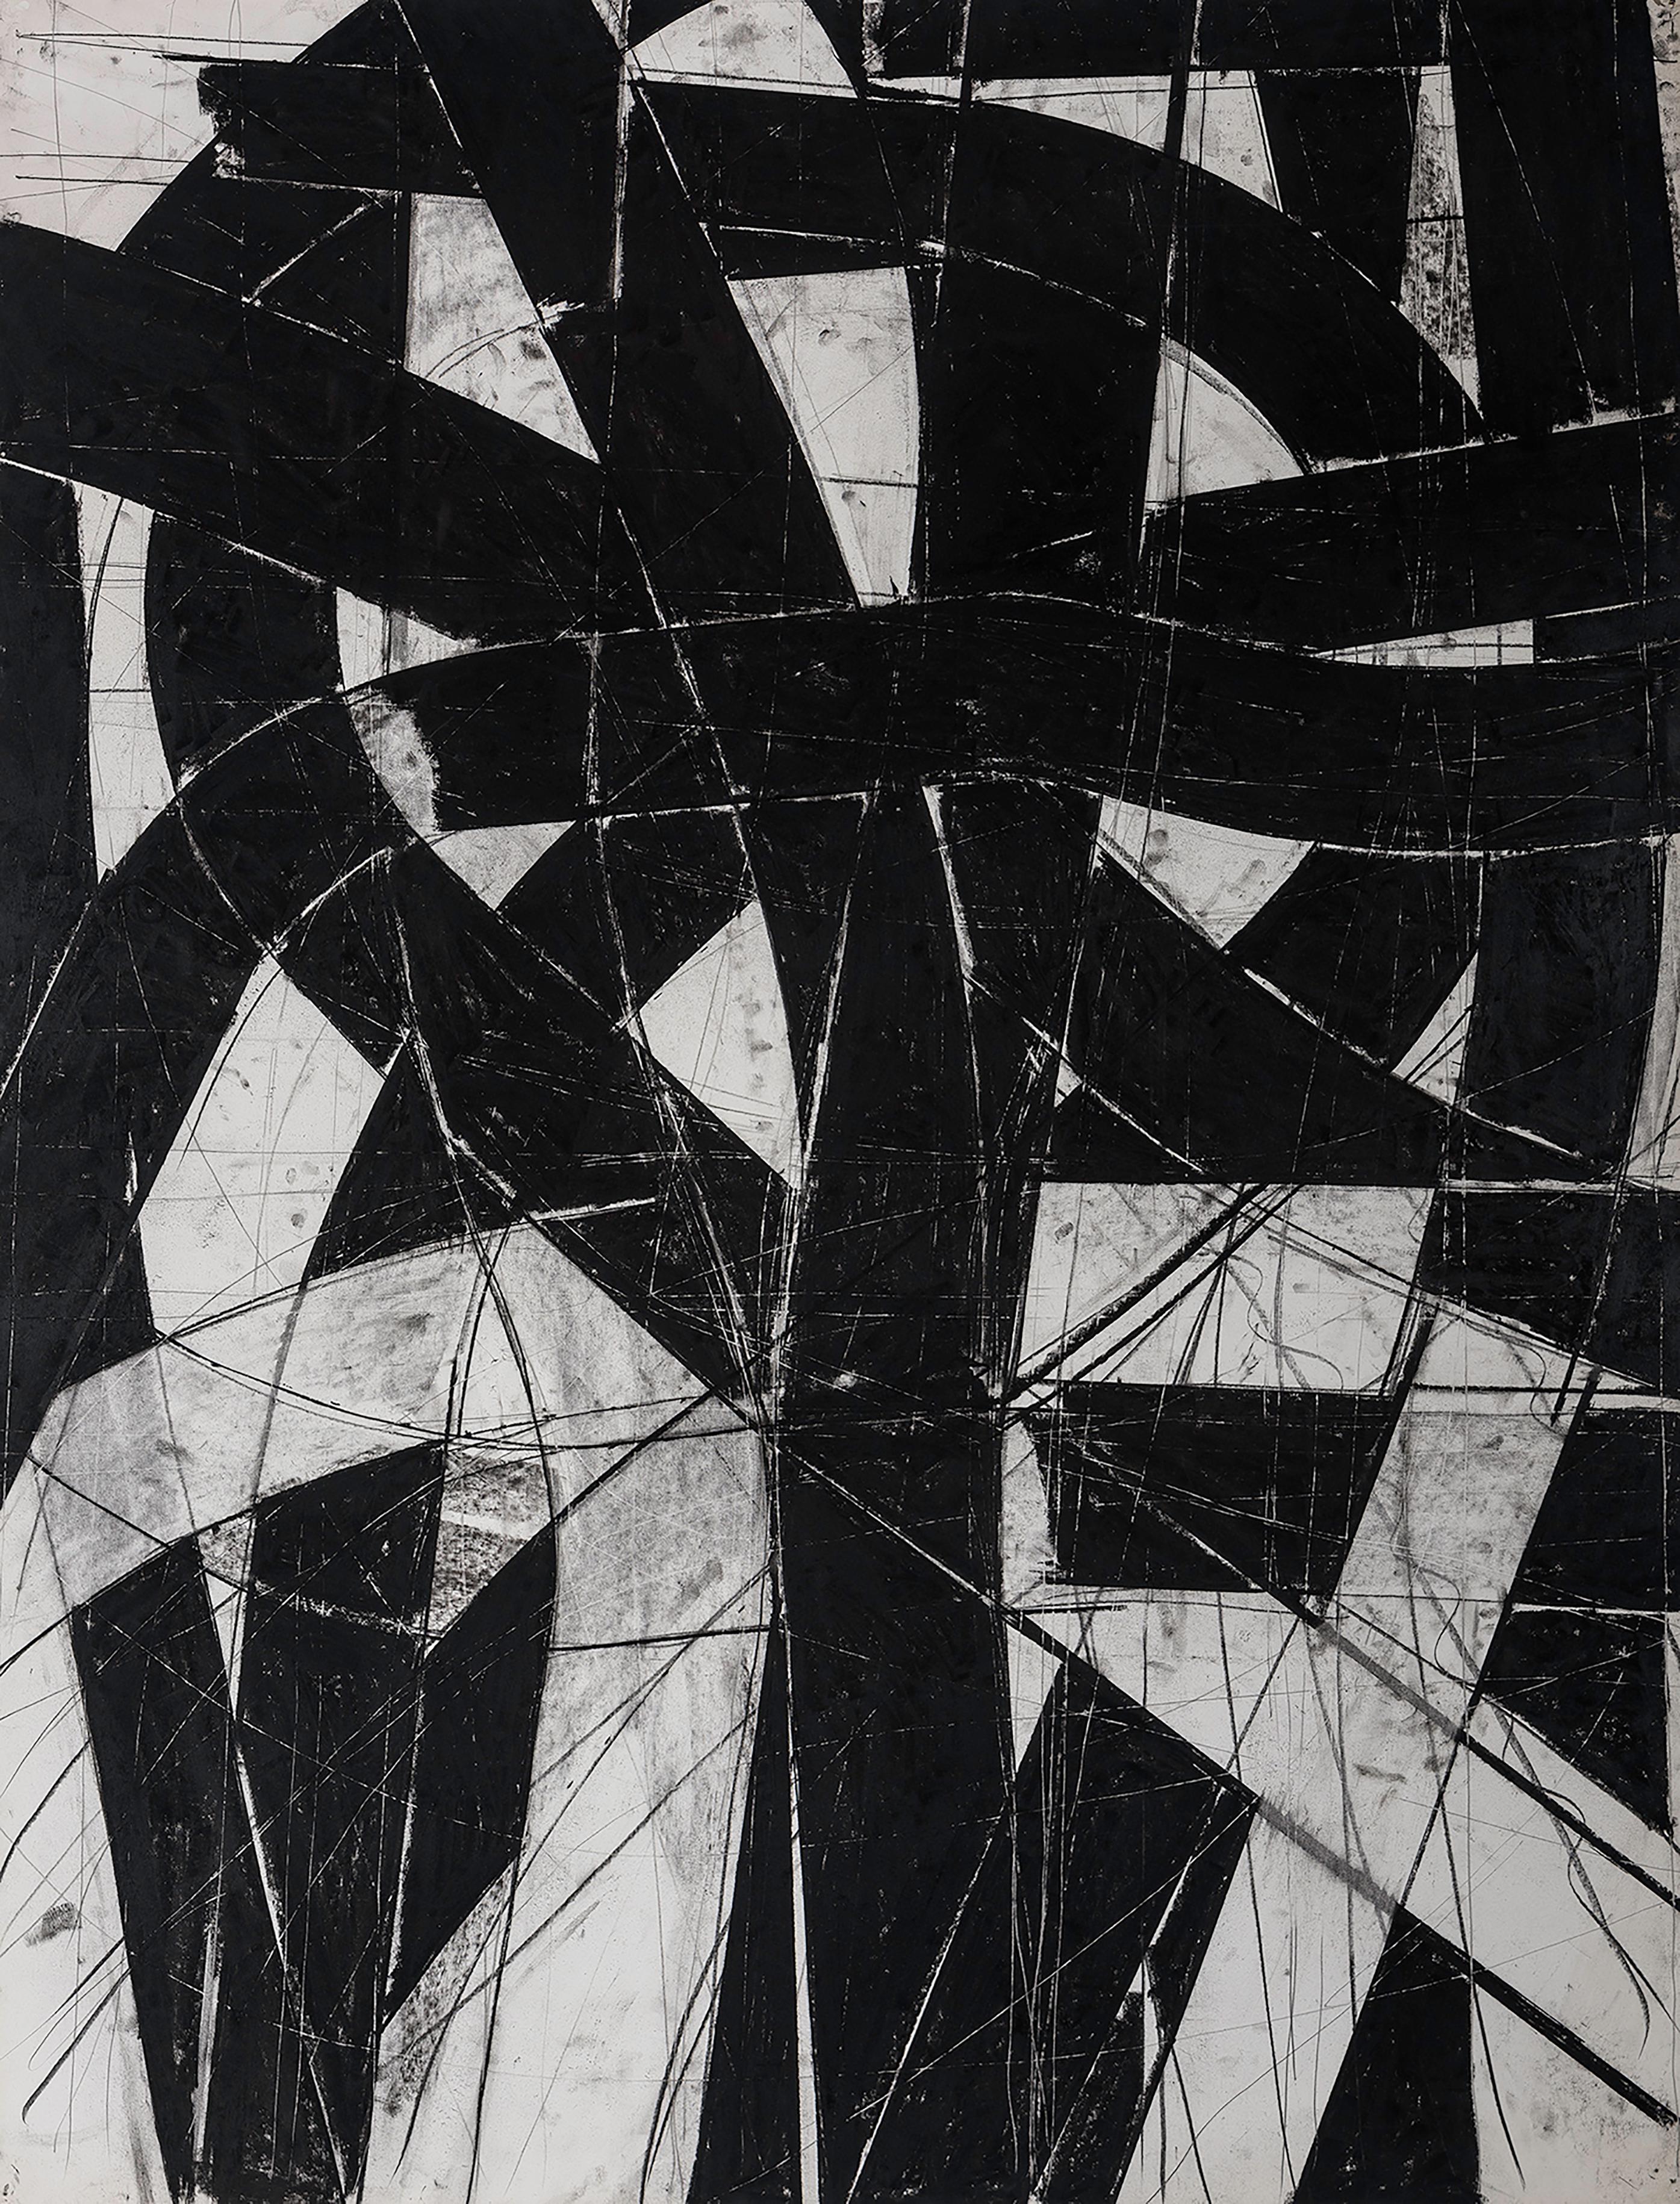 Trevor Norris Abstract Painting - “Urban Interstitial Abstraction #9” – Charcoal and Pastel on Paper - Unframed